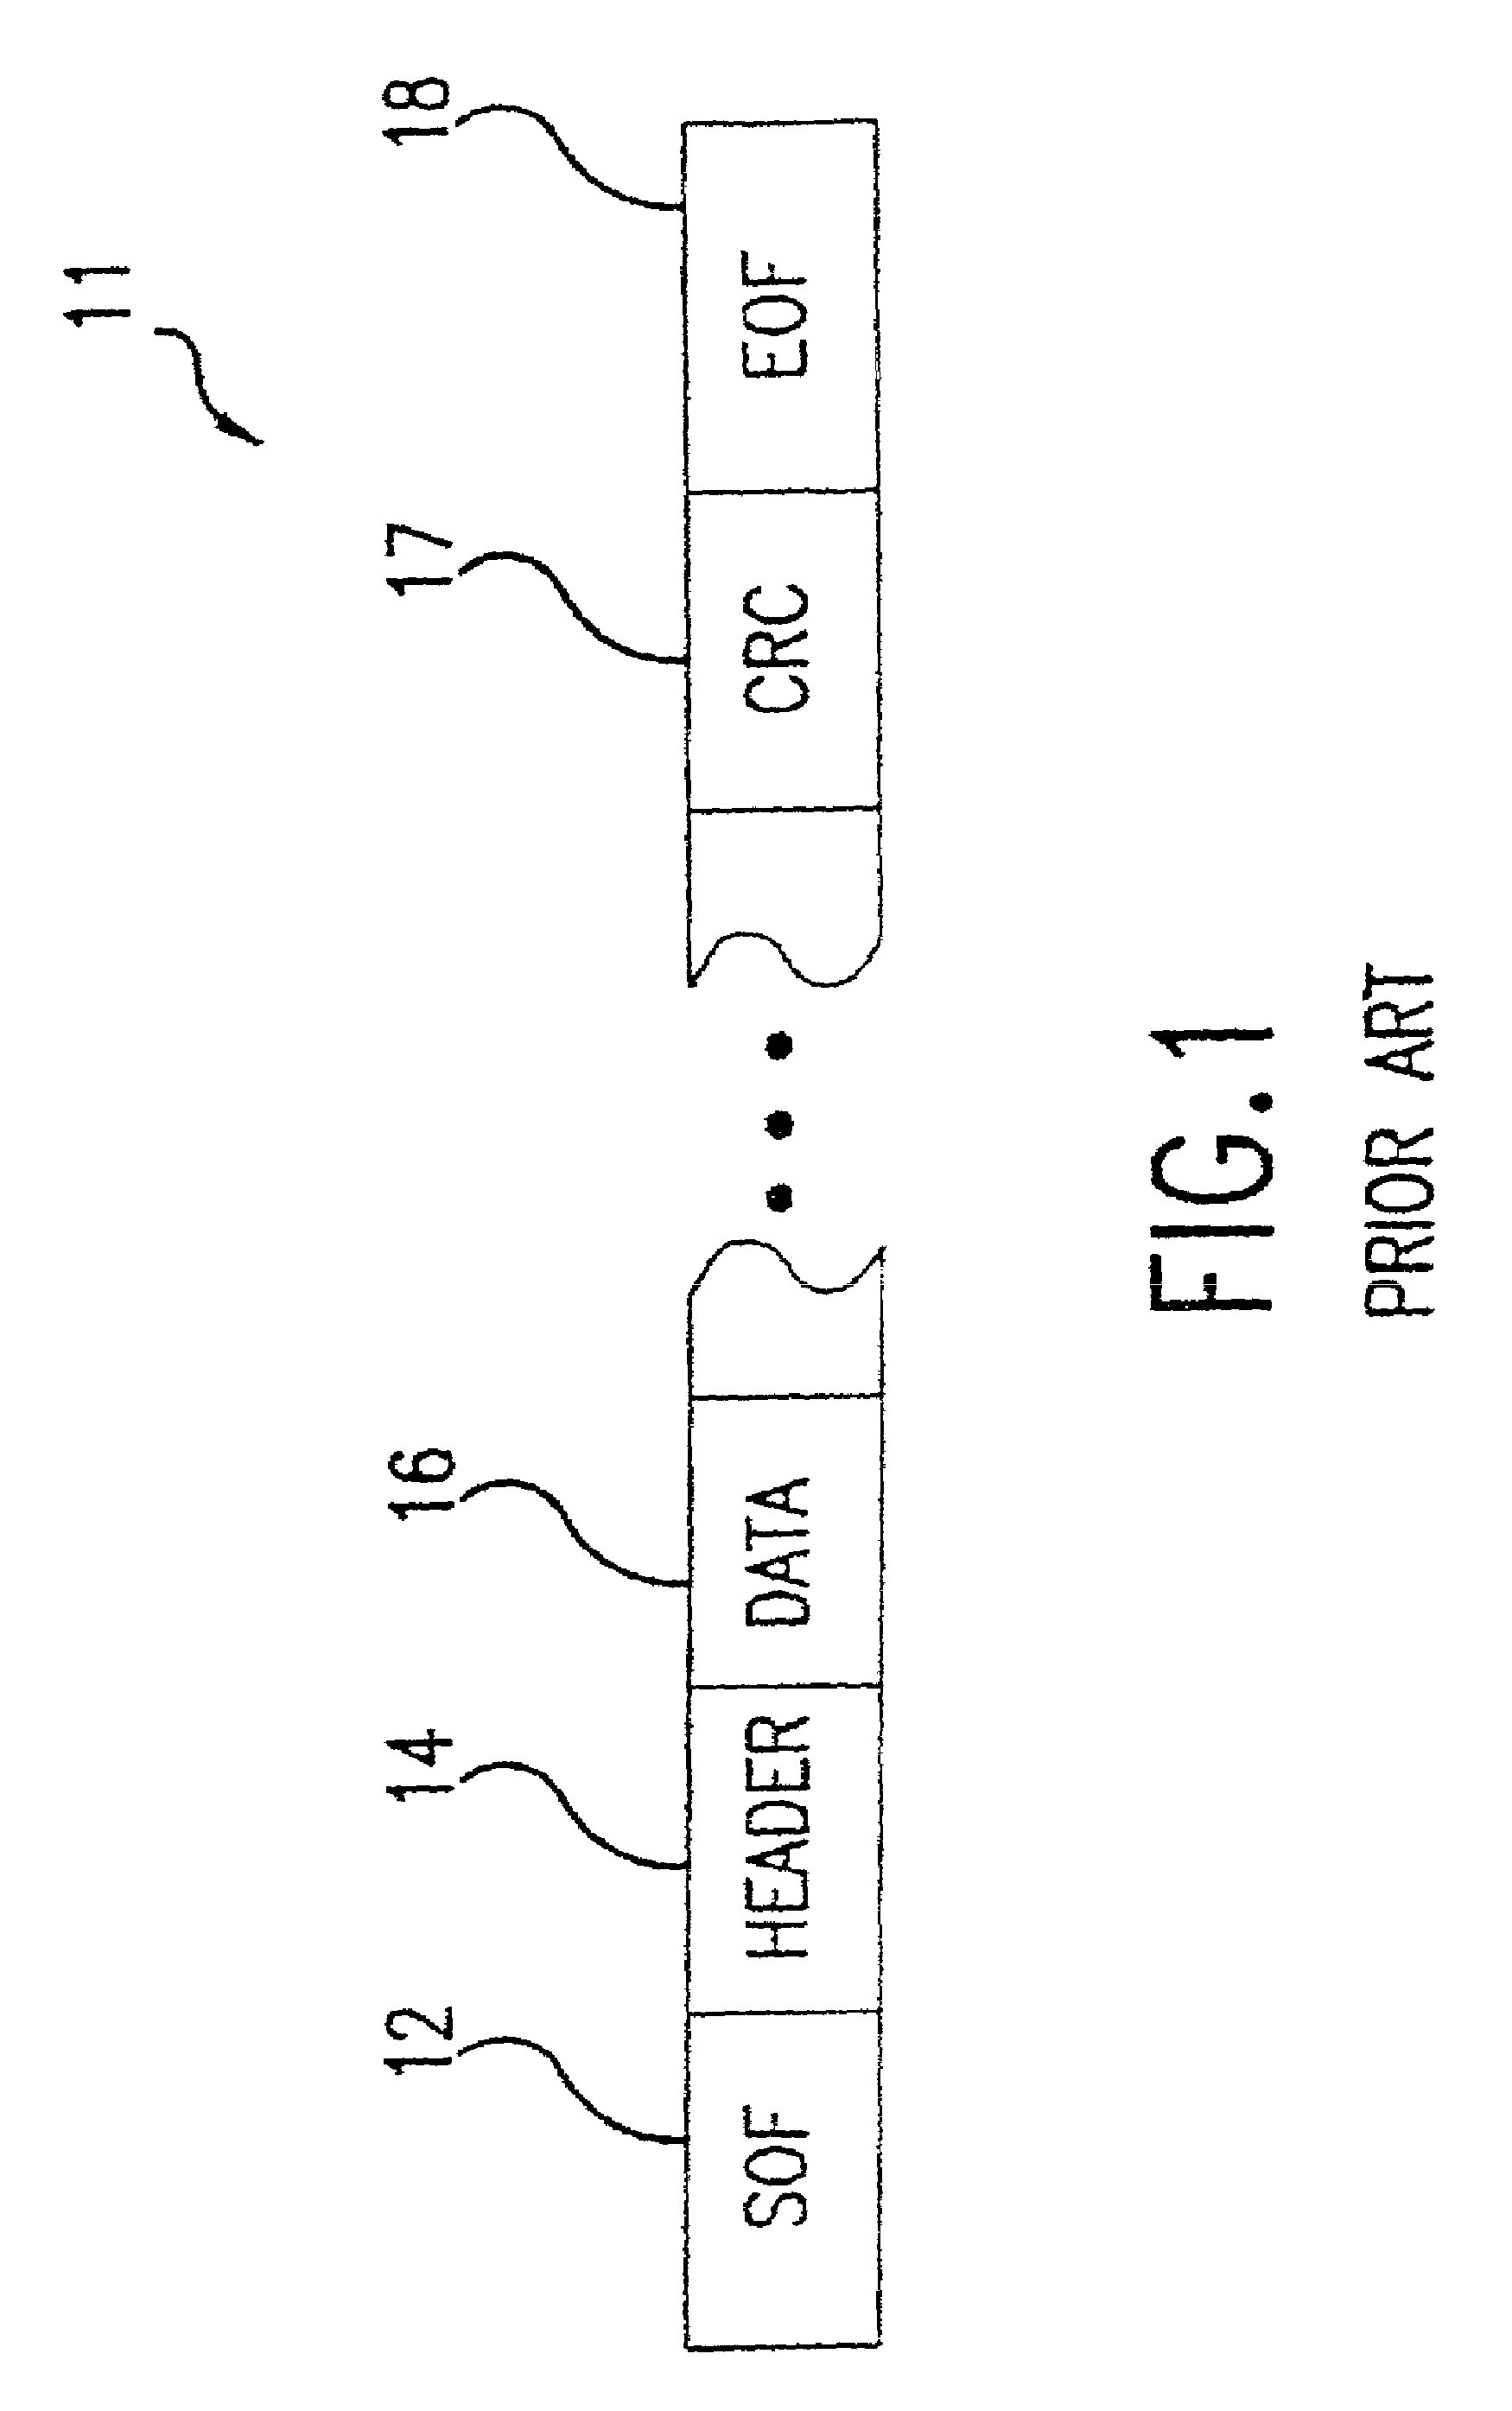 Method and apparatus for rendering a cell-based switch useful for frame based application protocols